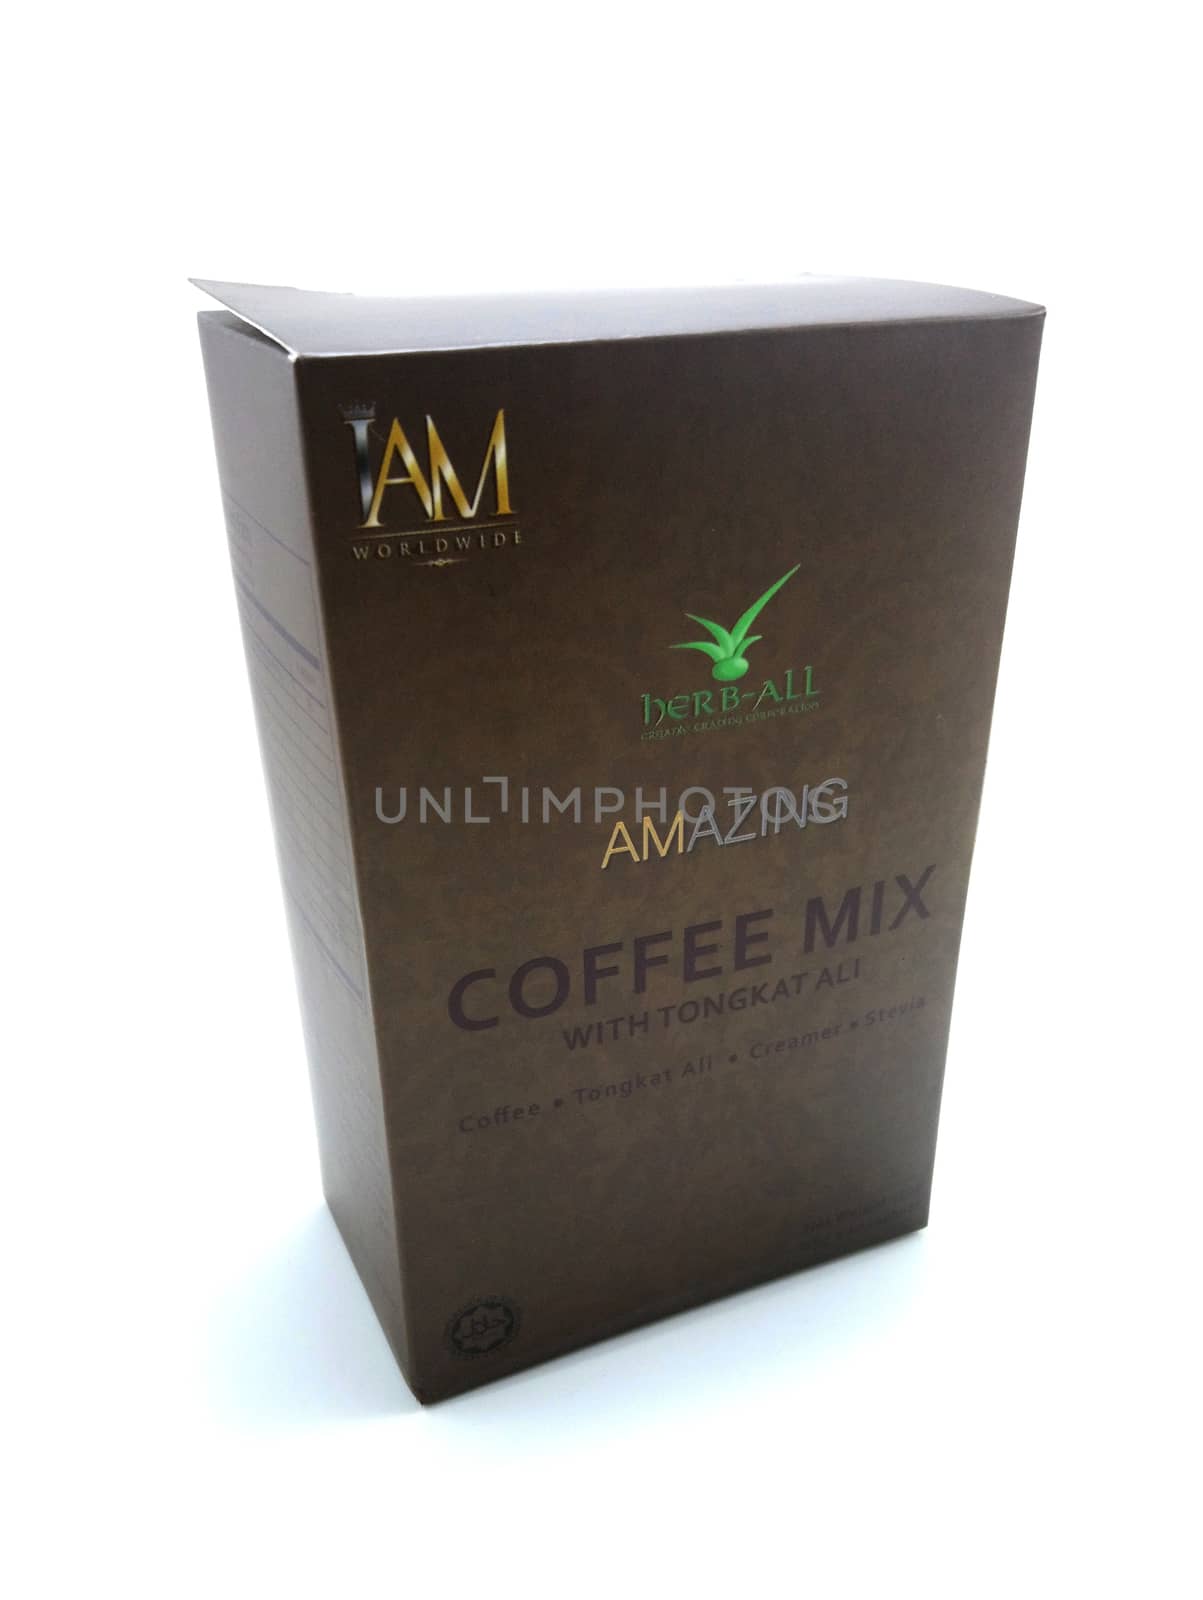 Iam amazing coffee mix with tongkat ali in Manila, Philippines by imwaltersy